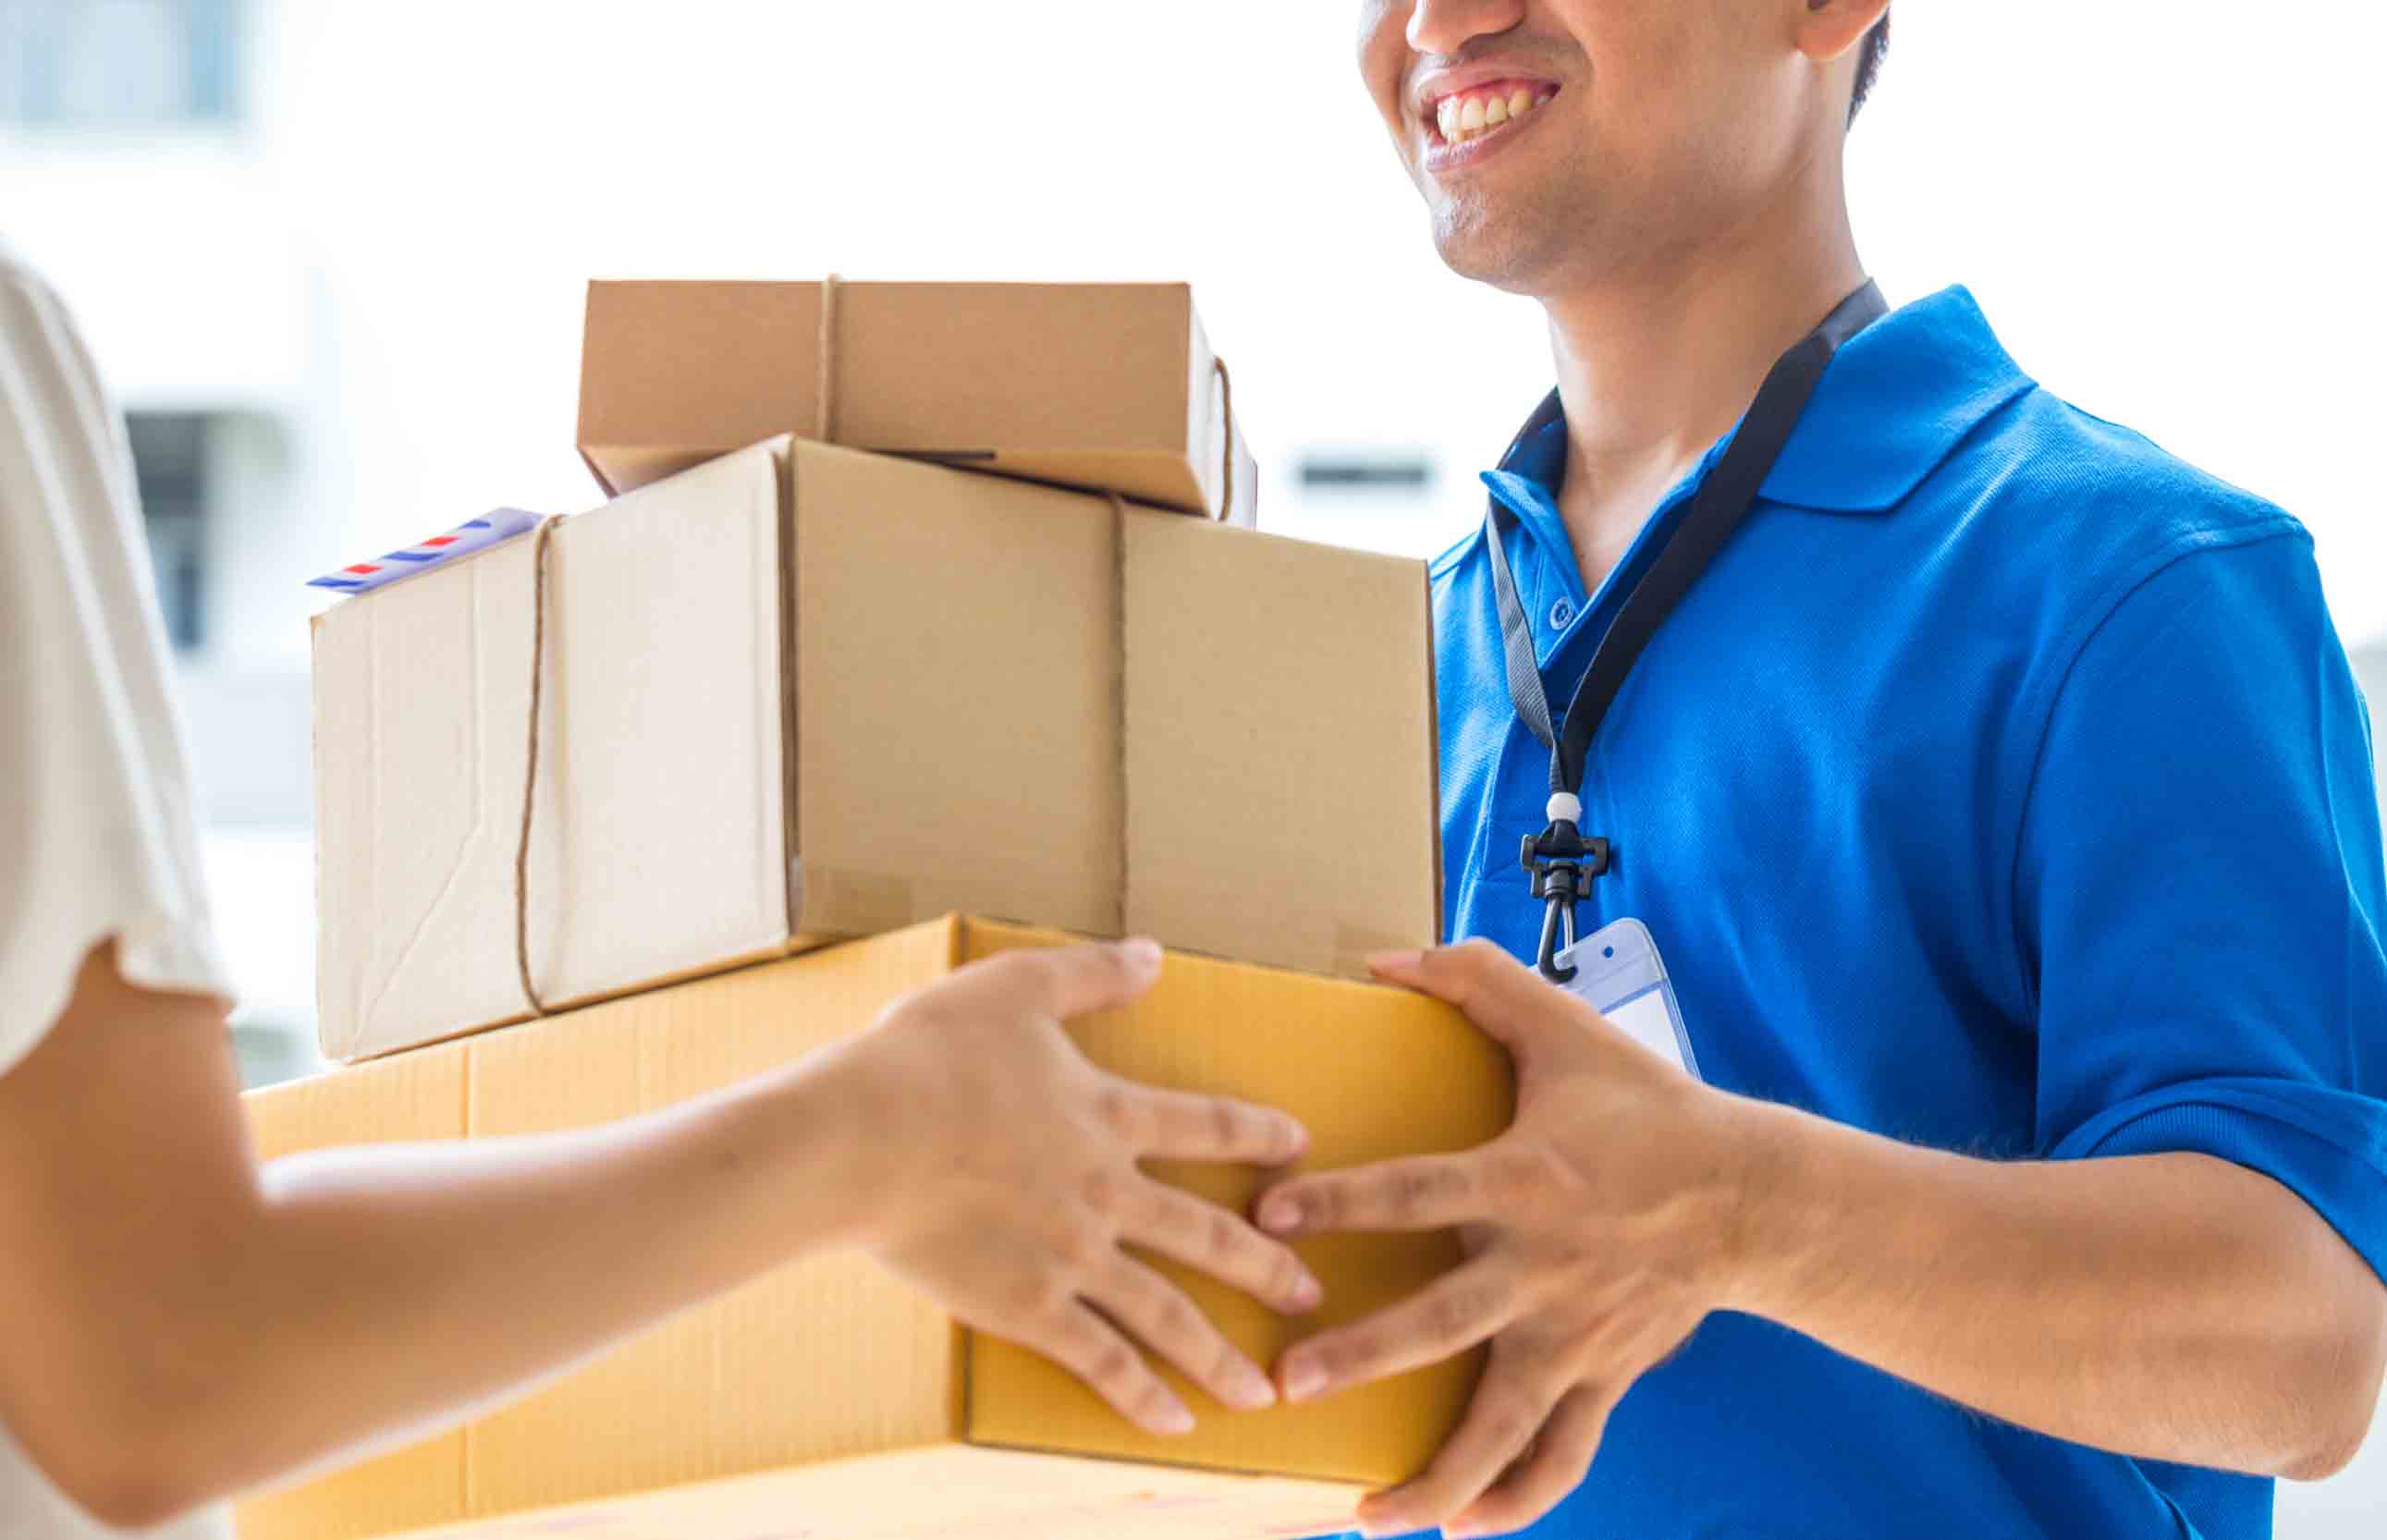 package delivery jobs